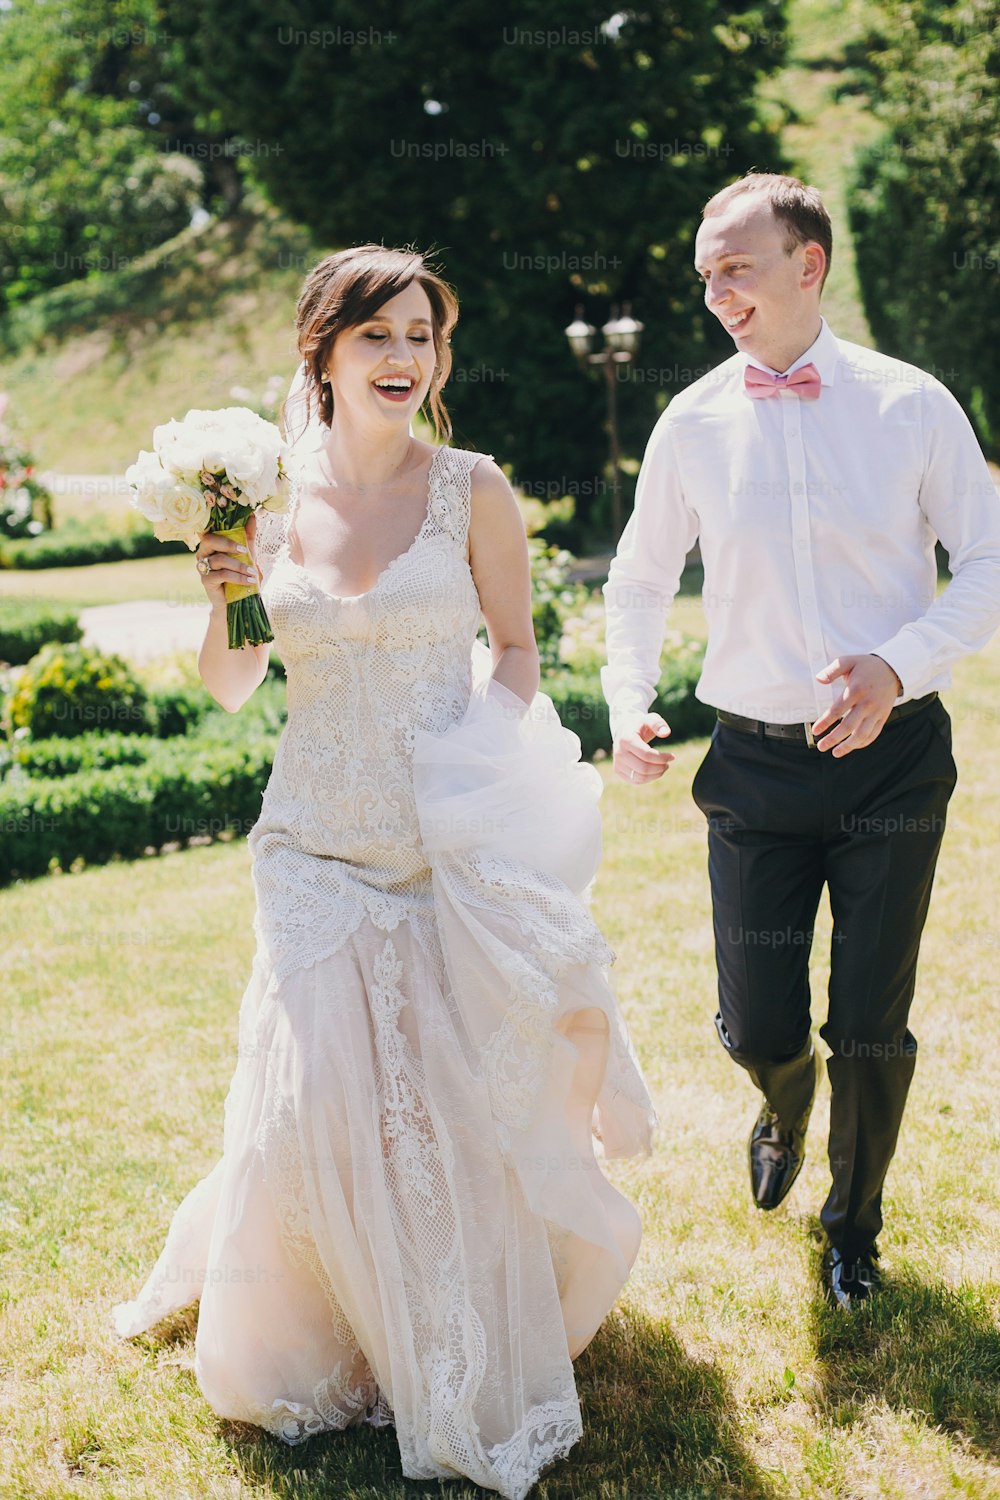 Gorgeous bride in amazing gown and stylish groom running and laughing in sunny park. Beautiful happy wedding couple enjoying time and having fun outdoors. Romantic moments